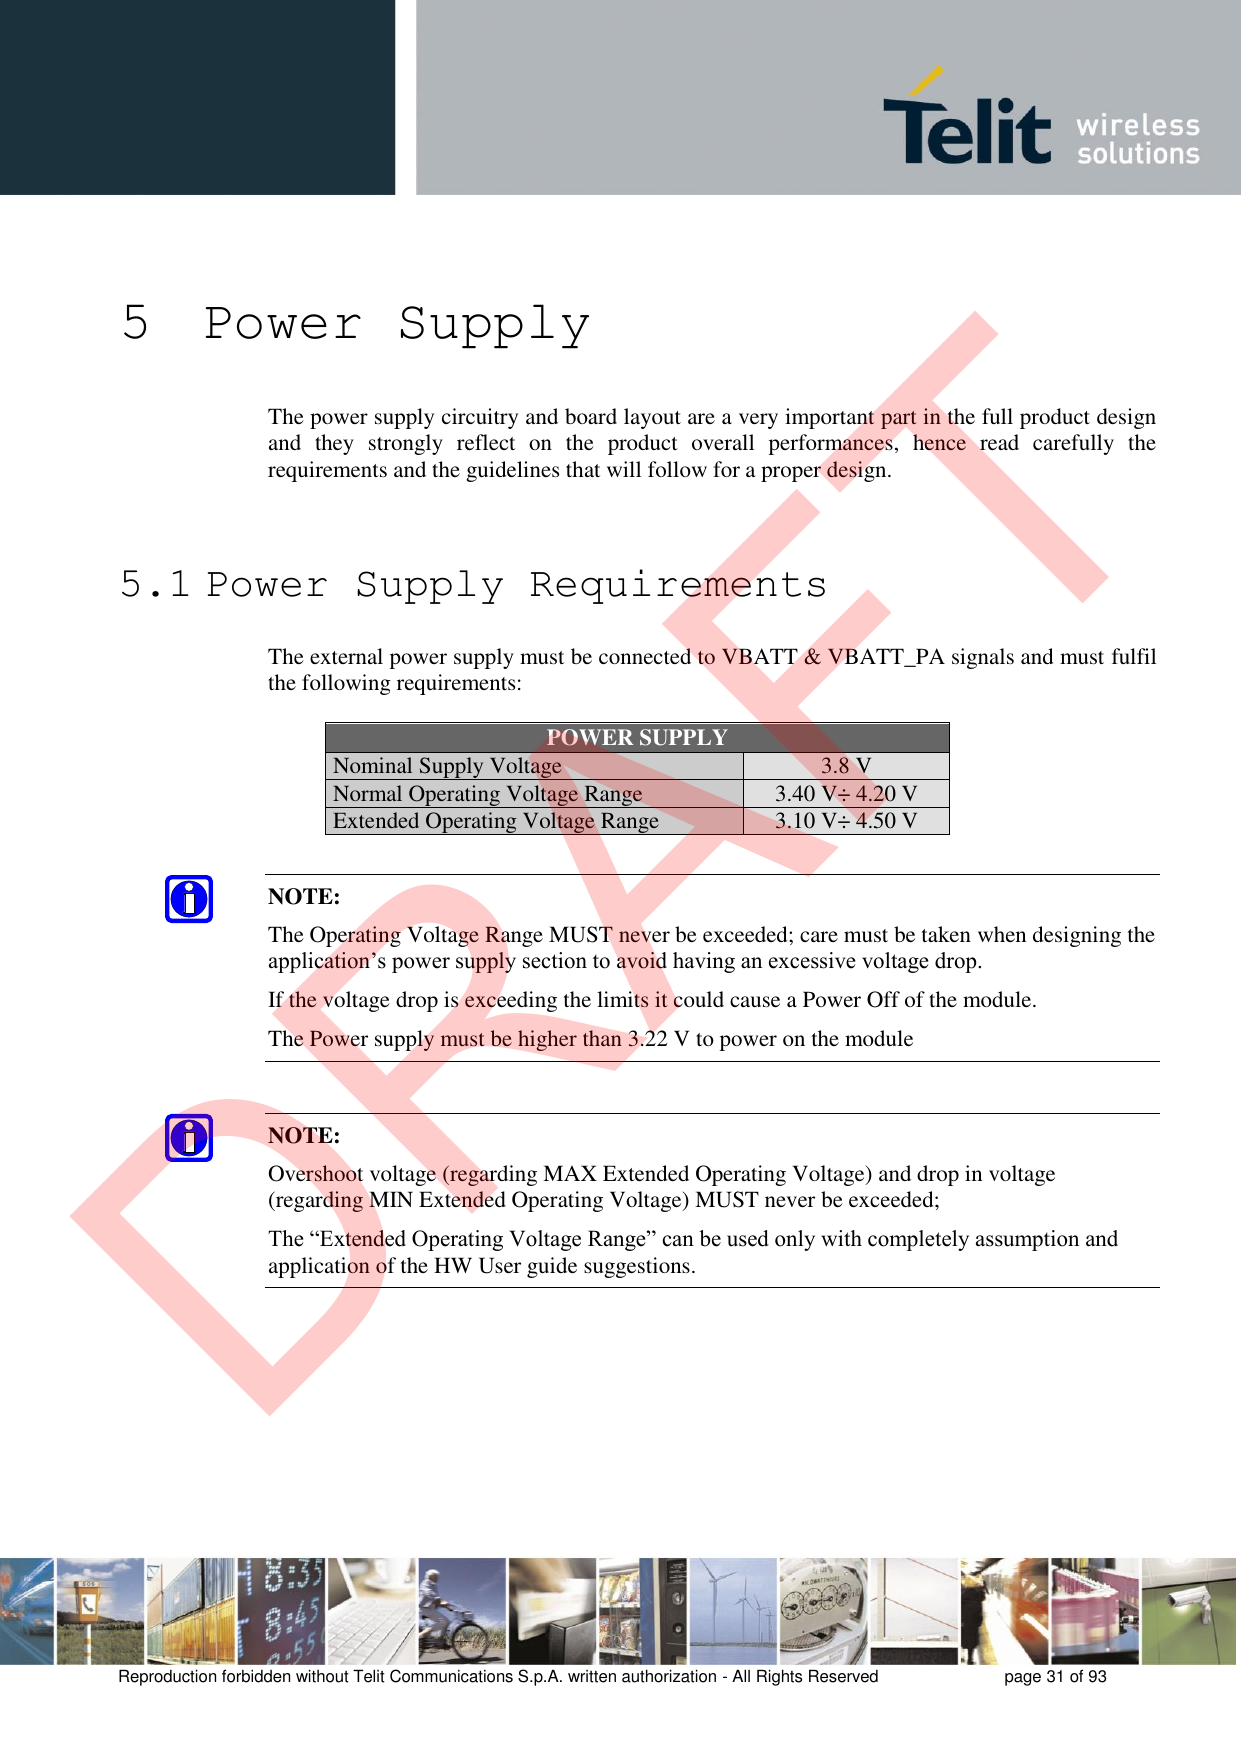 Reproduction forbidden without Telit Communications S.p.A. written authorization - All Rights Reserved  page 31 of 93 5 Power Supply The power supply circuitry and board layout are a very important part in the full product design and  they  strongly  reflect  on  the  product  overall  performances,  hence  read  carefully  the requirements and the guidelines that will follow for a proper design. 5.1 Power Supply Requirements The external power supply must be connected to VBATT &amp; VBATT_PA signals and must fulfil the following requirements: POWER SUPPLY Nominal Supply Voltage 3.8 V Normal Operating Voltage Range 3.40 V÷ 4.20 V Extended Operating Voltage Range 3.10 V÷ 4.50 V NOTE: The Operating Voltage Range MUST never be exceeded; care must be taken when designing the application’s power supply section to avoid having an excessive voltage drop.  If the voltage drop is exceeding the limits it could cause a Power Off of the module. The Power supply must be higher than 3.22 V to power on the module NOTE: Overshoot voltage (regarding MAX Extended Operating Voltage) and drop in voltage (regarding MIN Extended Operating Voltage) MUST never be exceeded;  The “Extended Operating Voltage Range” can be used only with completely assumption and application of the HW User guide suggestions.  DRAFT